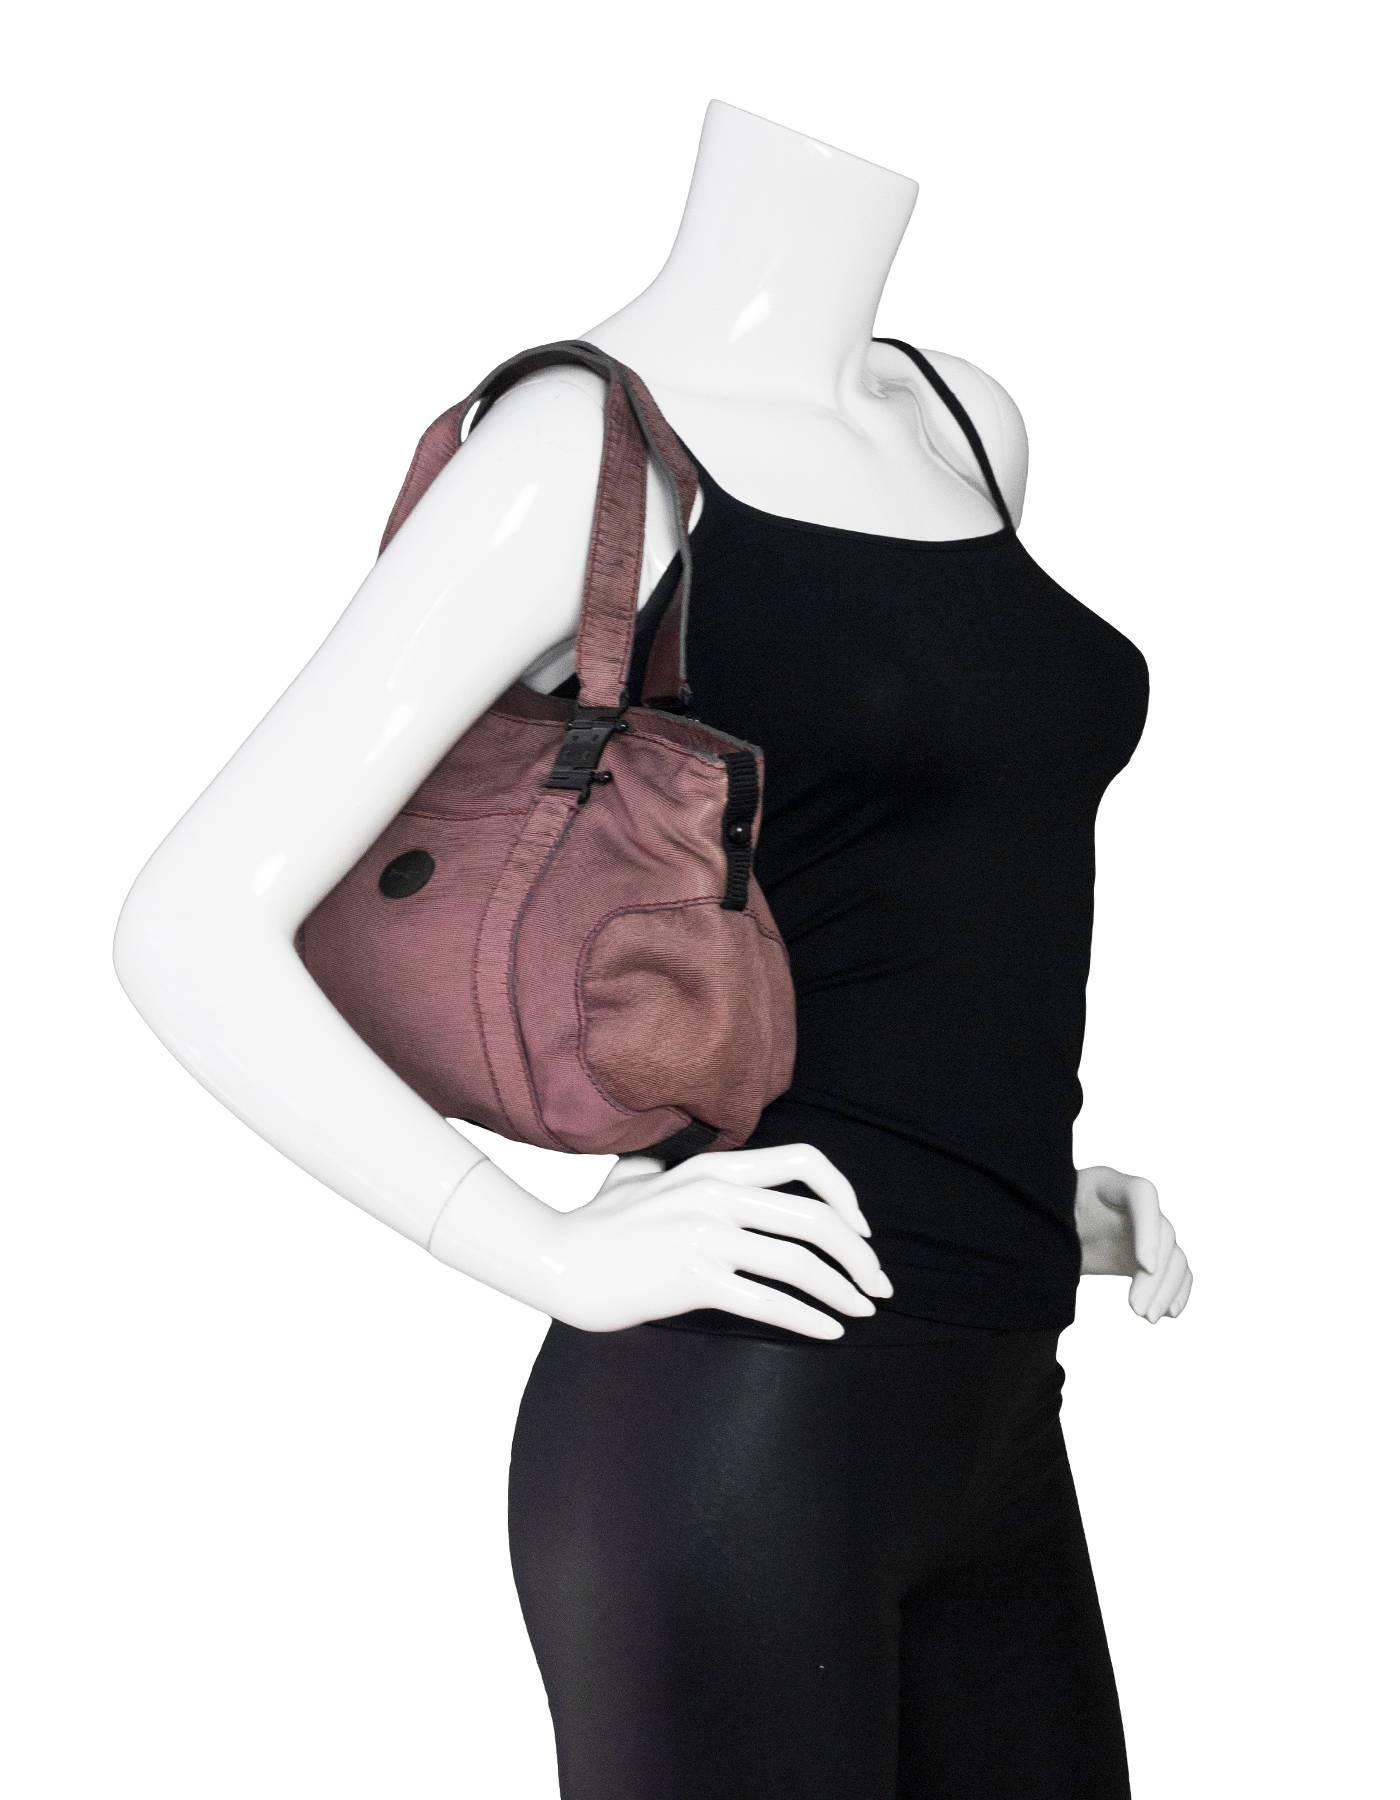 Rochas Mauve Layered Leather Bag

Made In: Italy
Color: Mauve
Hardware: Black
Materials: Leather
Lining: Black textile
Closure/Opening: Zip top
Exterior Pockets: None
Interior Pockets: One zipper pocket 
Overall Condition: Excellent pre-owned